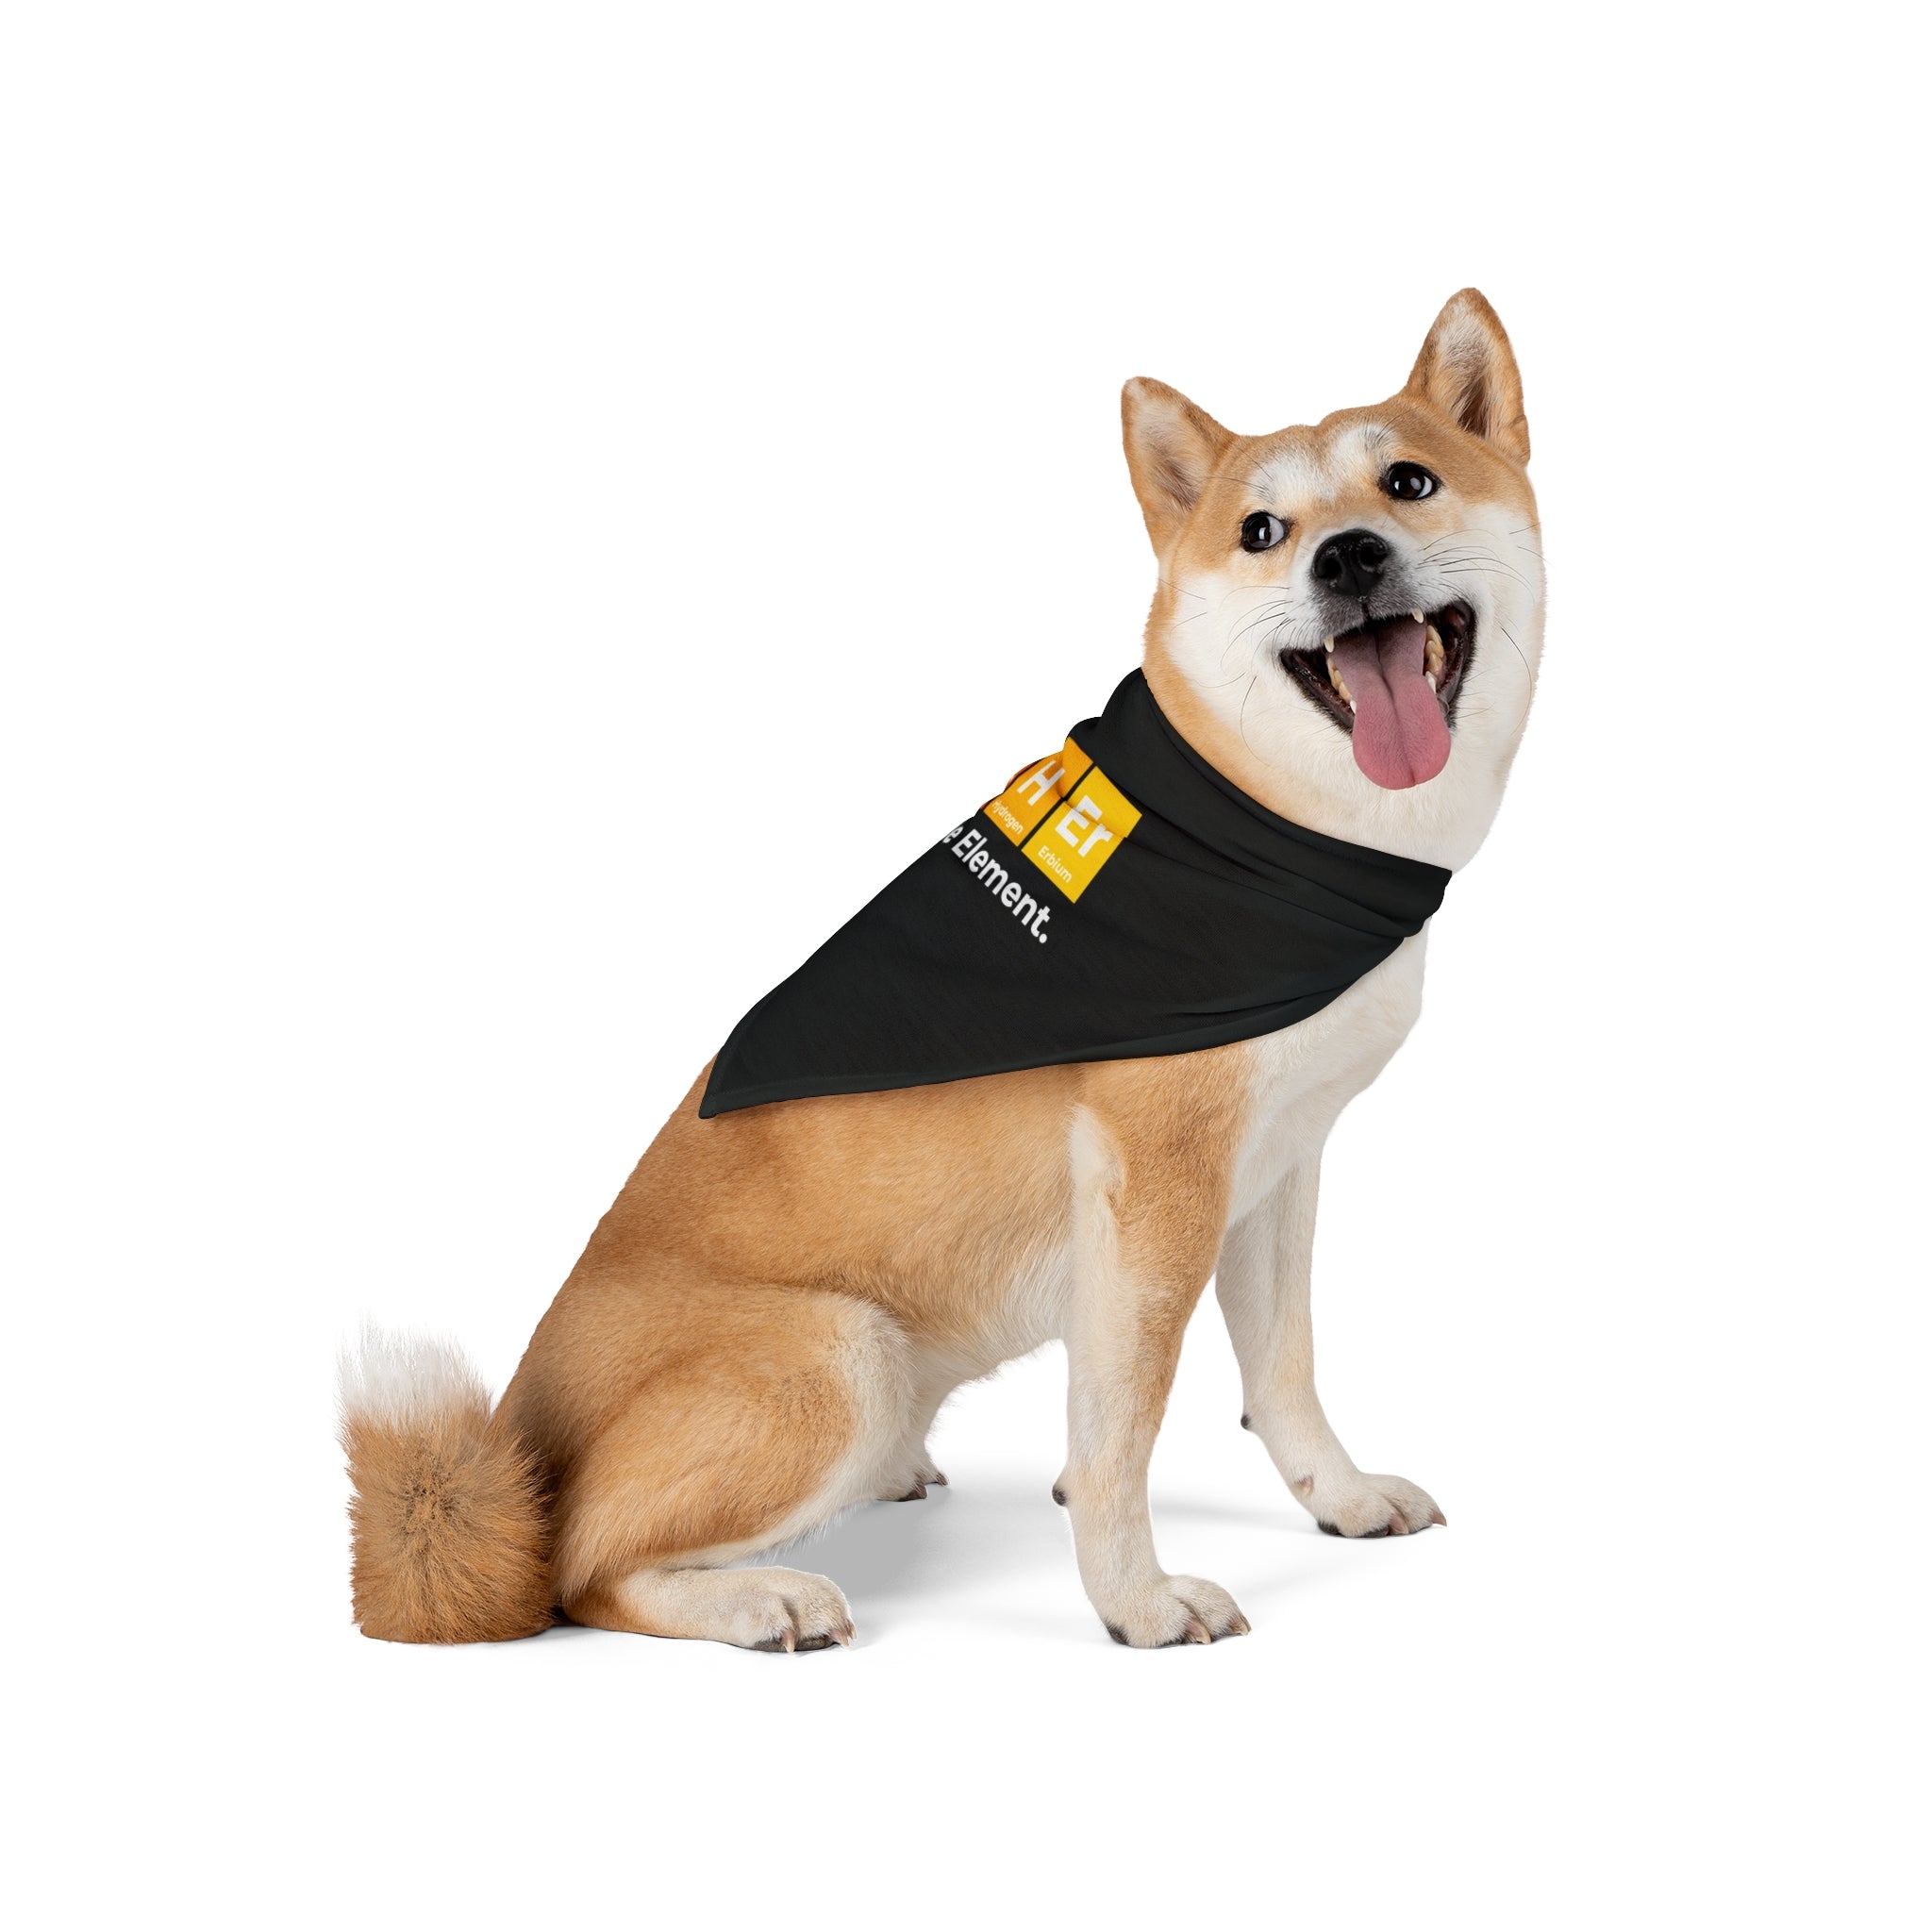 A Shiba Inu dog wearing a Father Graphic - Pet Bandana with a yellow design sits with its mouth open and tongue out against a white background.